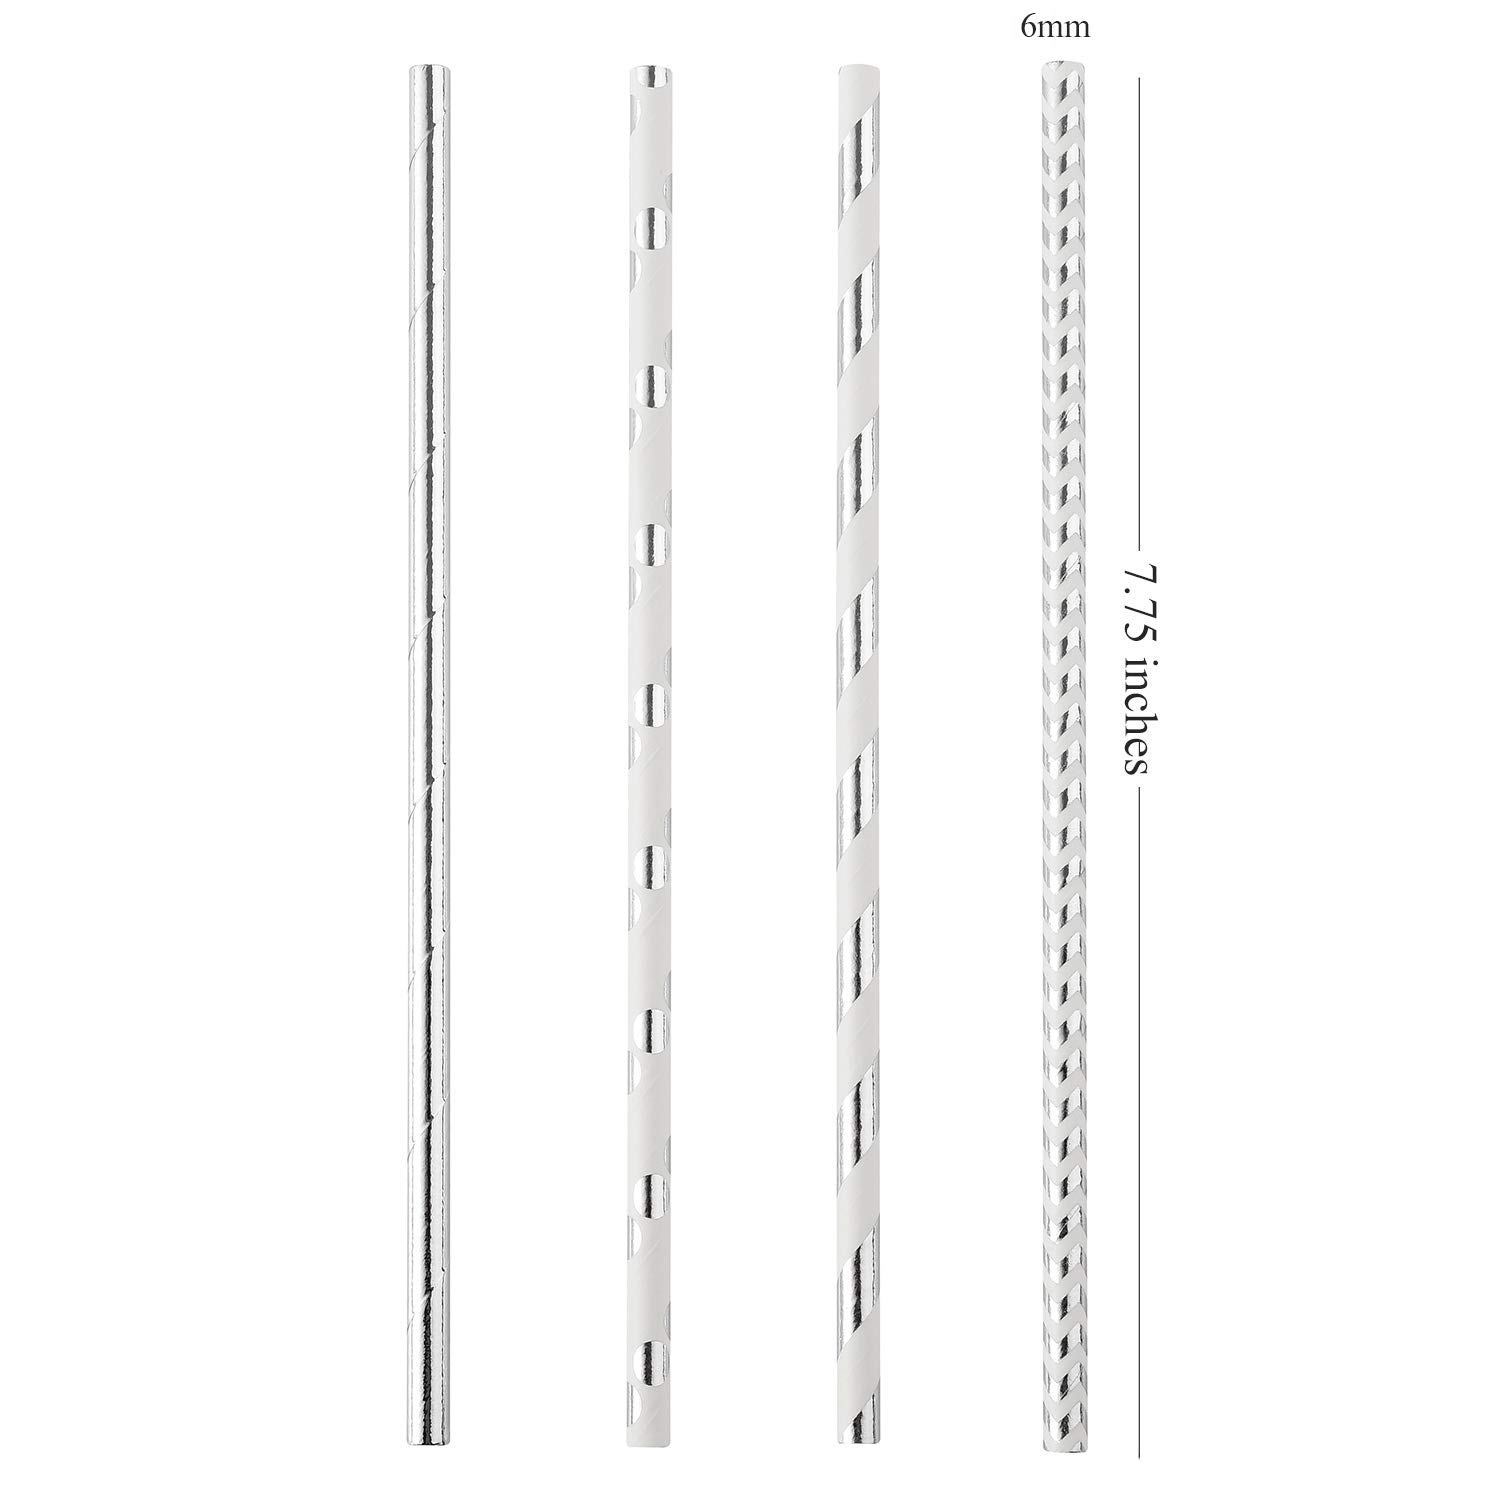 ALINK Biodegradable Silver Paper Straws Bulk, Pack of 100 Metallic Foil Striped/Wave/Dots Straws for Birthday, Wedding, Bridal/Baby Shower, Christmas Decorations and Party Supplies